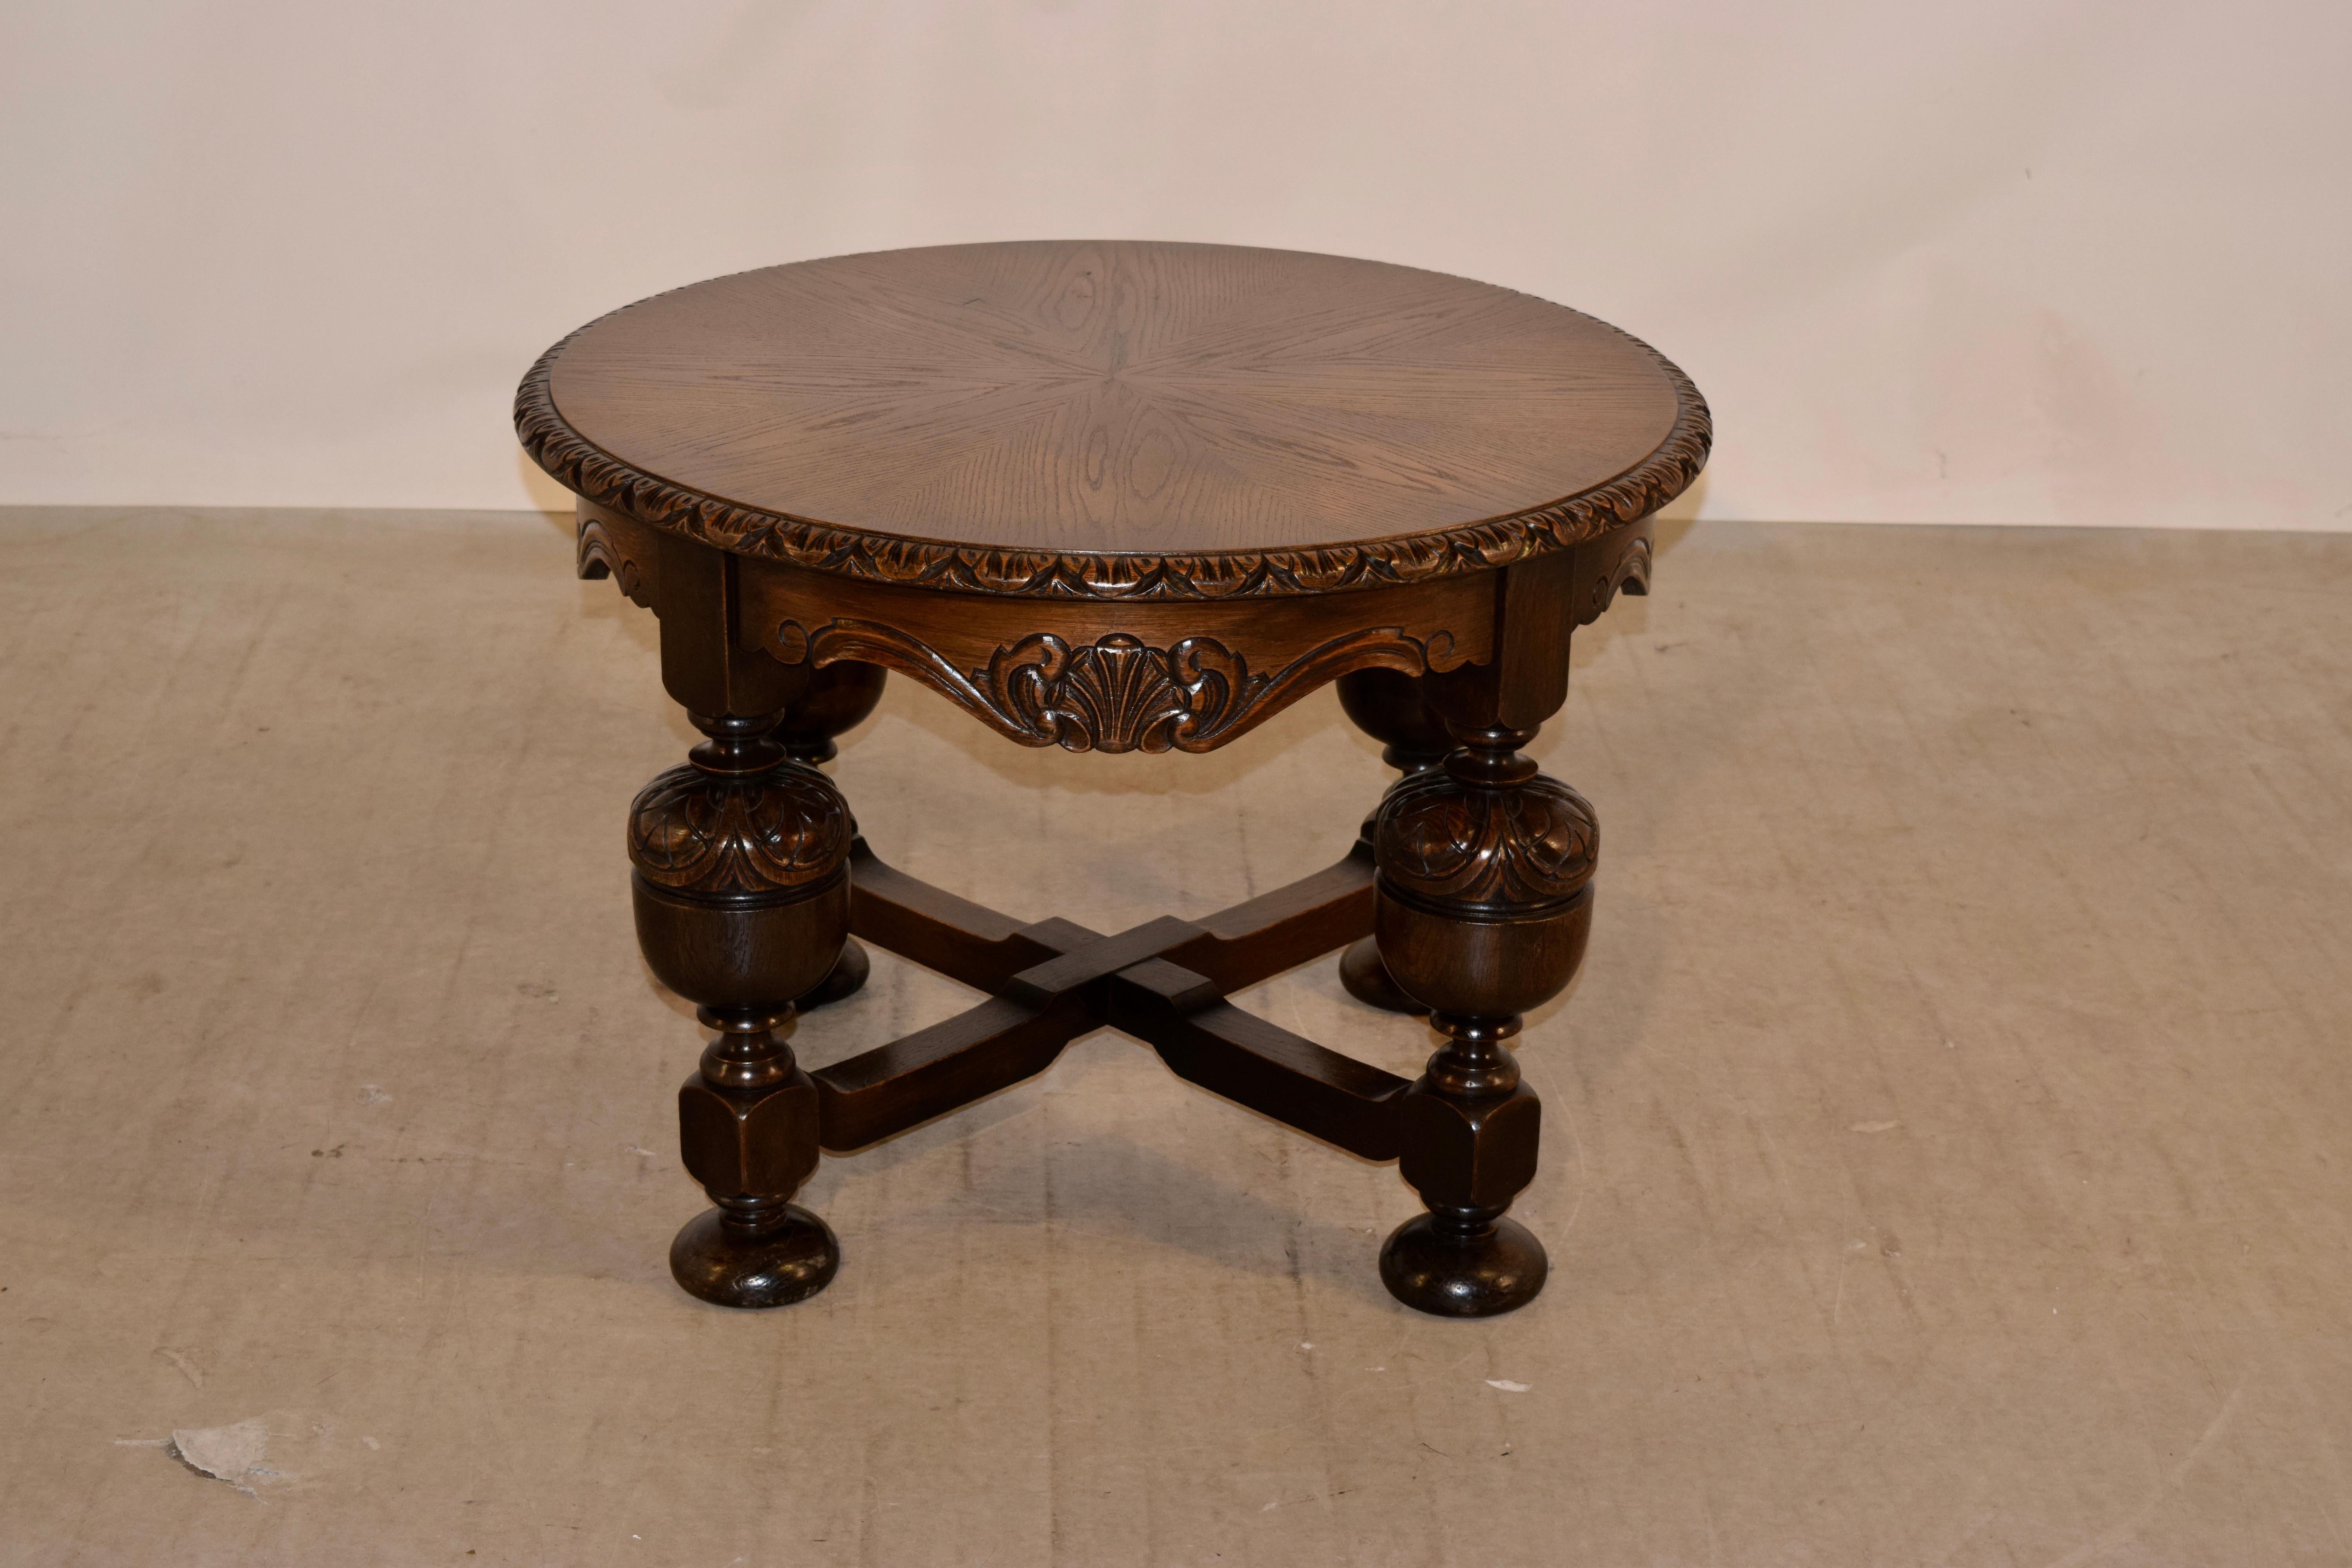 English oak cocktail table, circa 1900 with a wonderfully parqueted top in a wheel pattern, all with a beveled and hand carved decorated edge over thickly hand turned and carved decorated legs, joined by shaped cross stretchers. Supported on hand